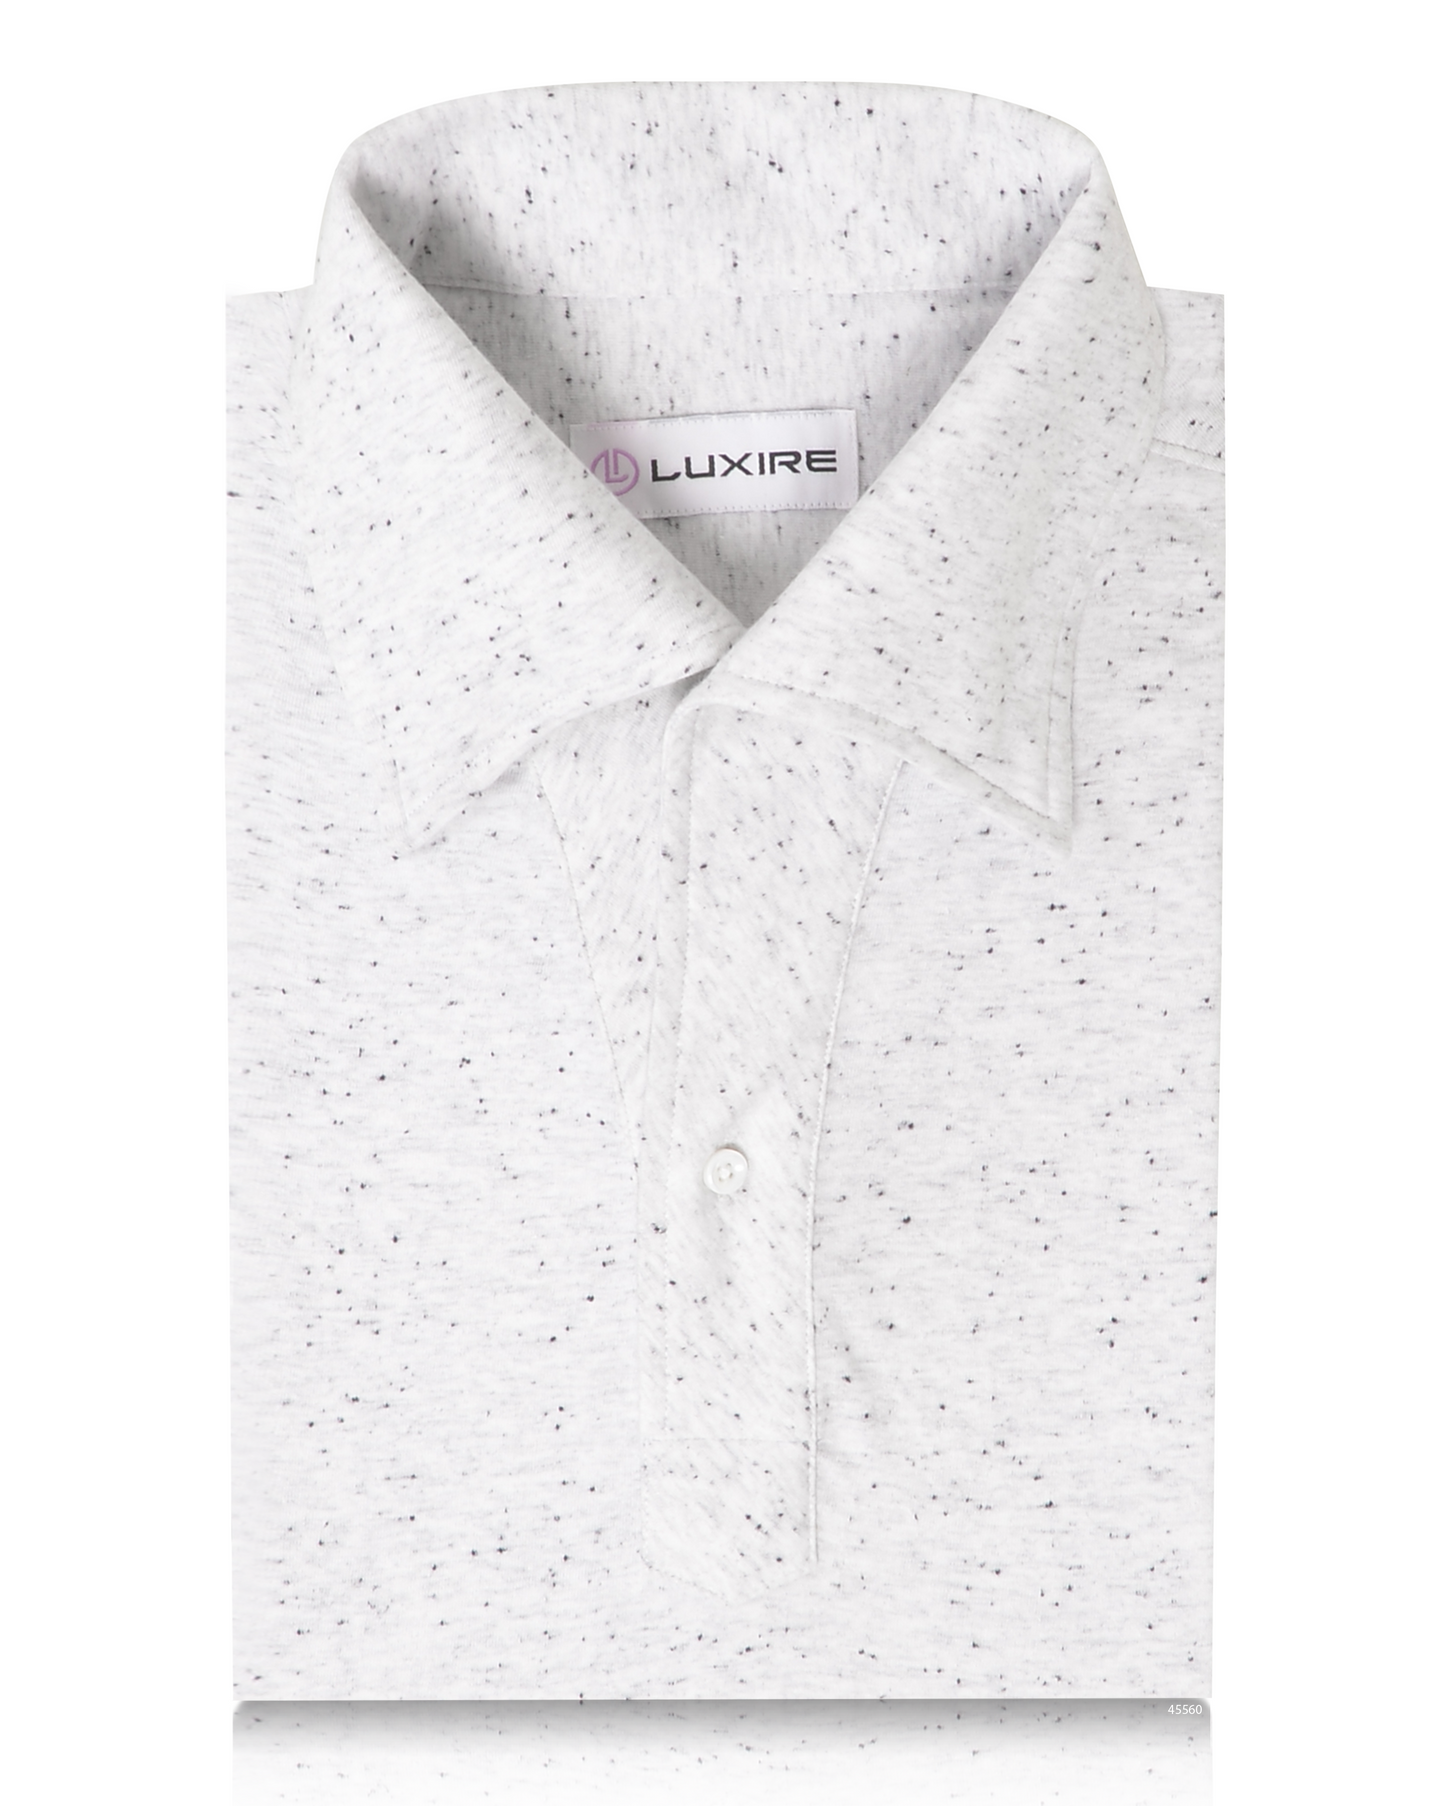 Front of the custom oxford polo shirt for men by Luxire in speckled white